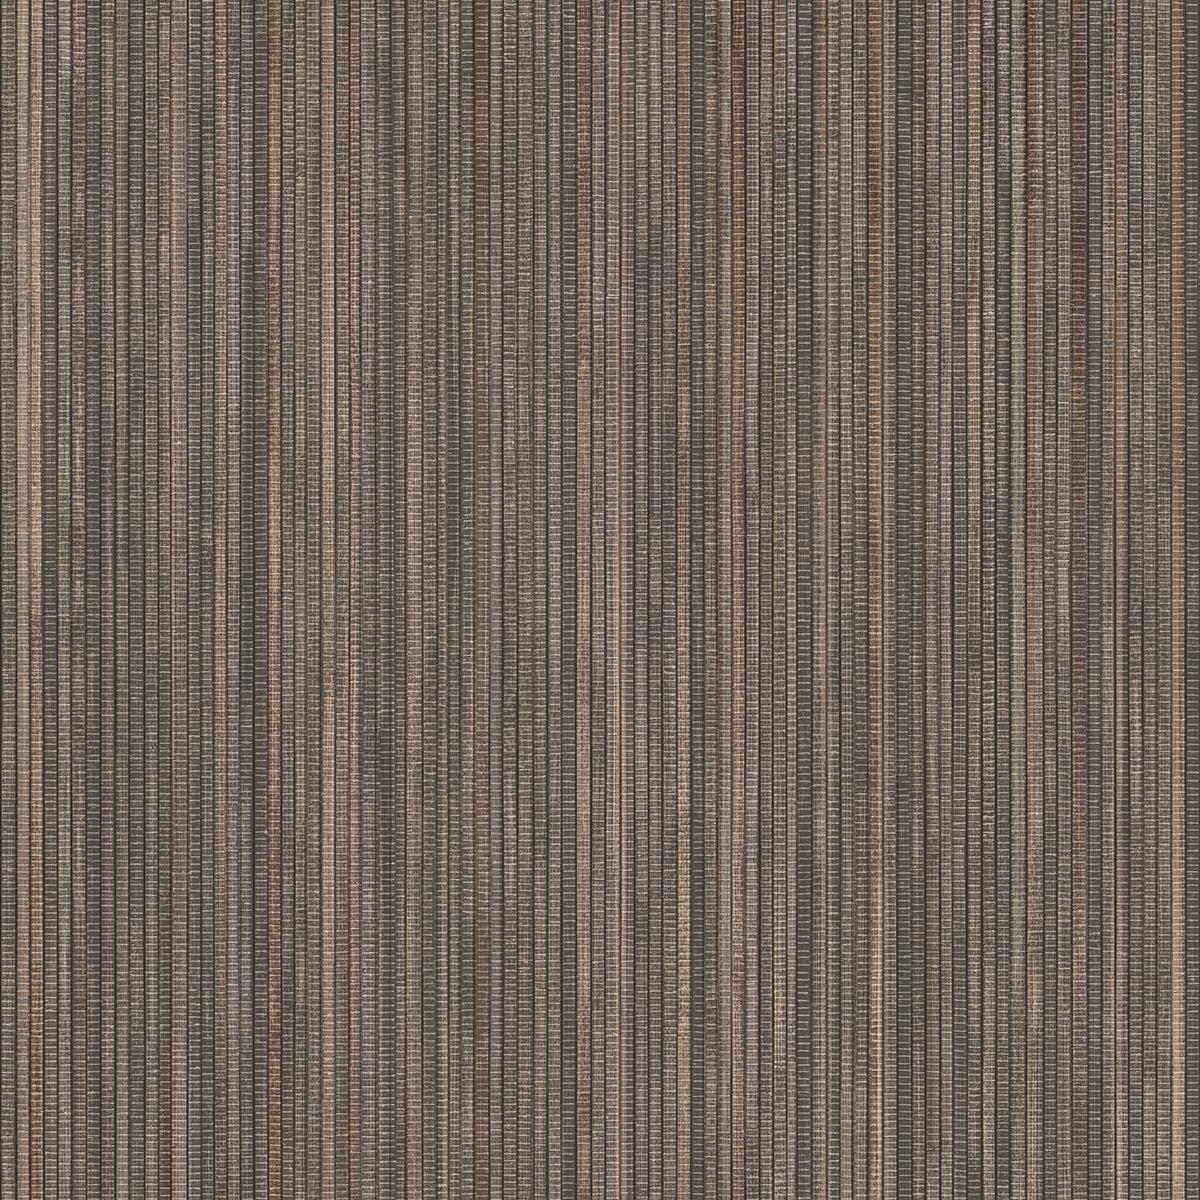 Grasscloth Bronze Self-adhesive Removable Wallpaper - Grasscloth Wallpaper Full Pattern , HD Wallpaper & Backgrounds